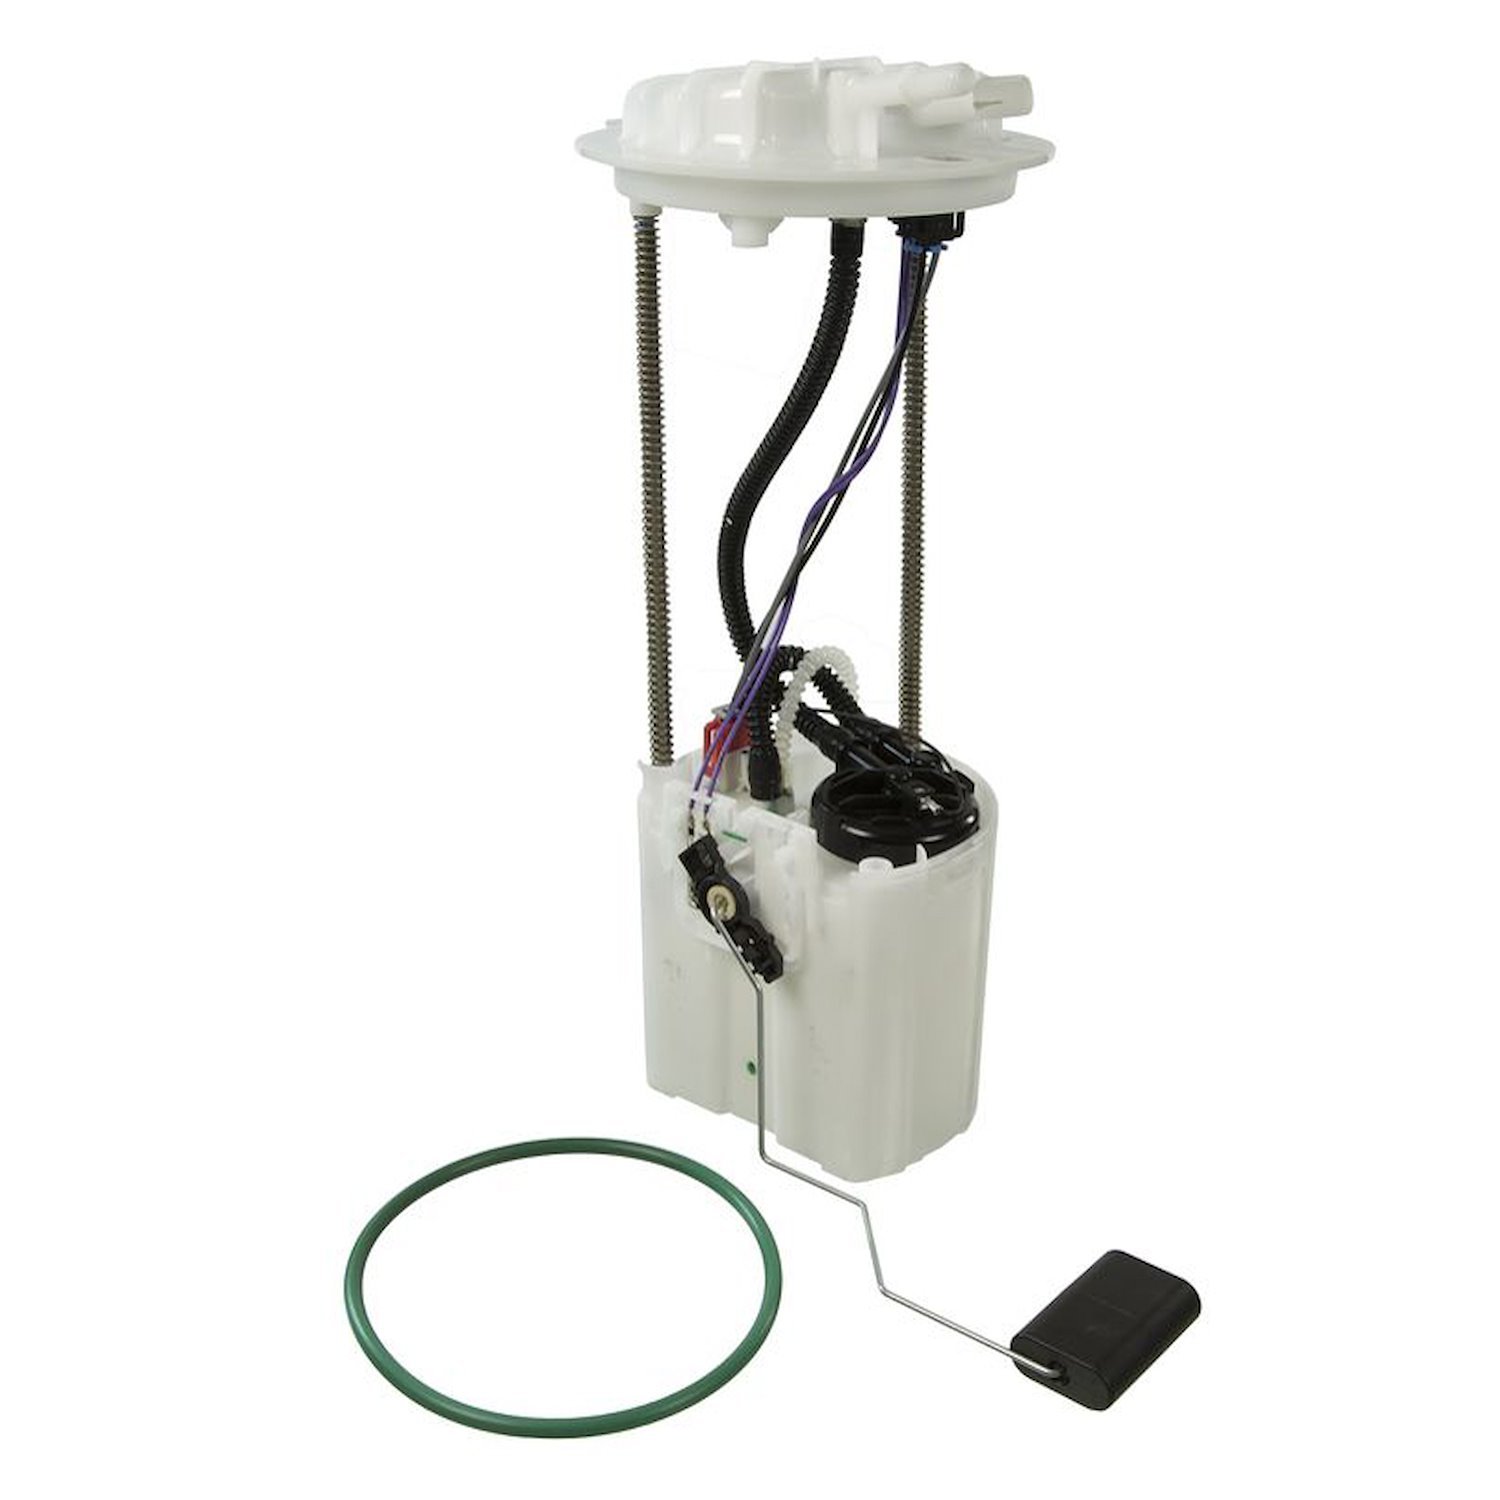 OE Chrysler/Dodge Replacement Fuel Pump Module Assembly for 2009-2011 Dodge Ram 1500